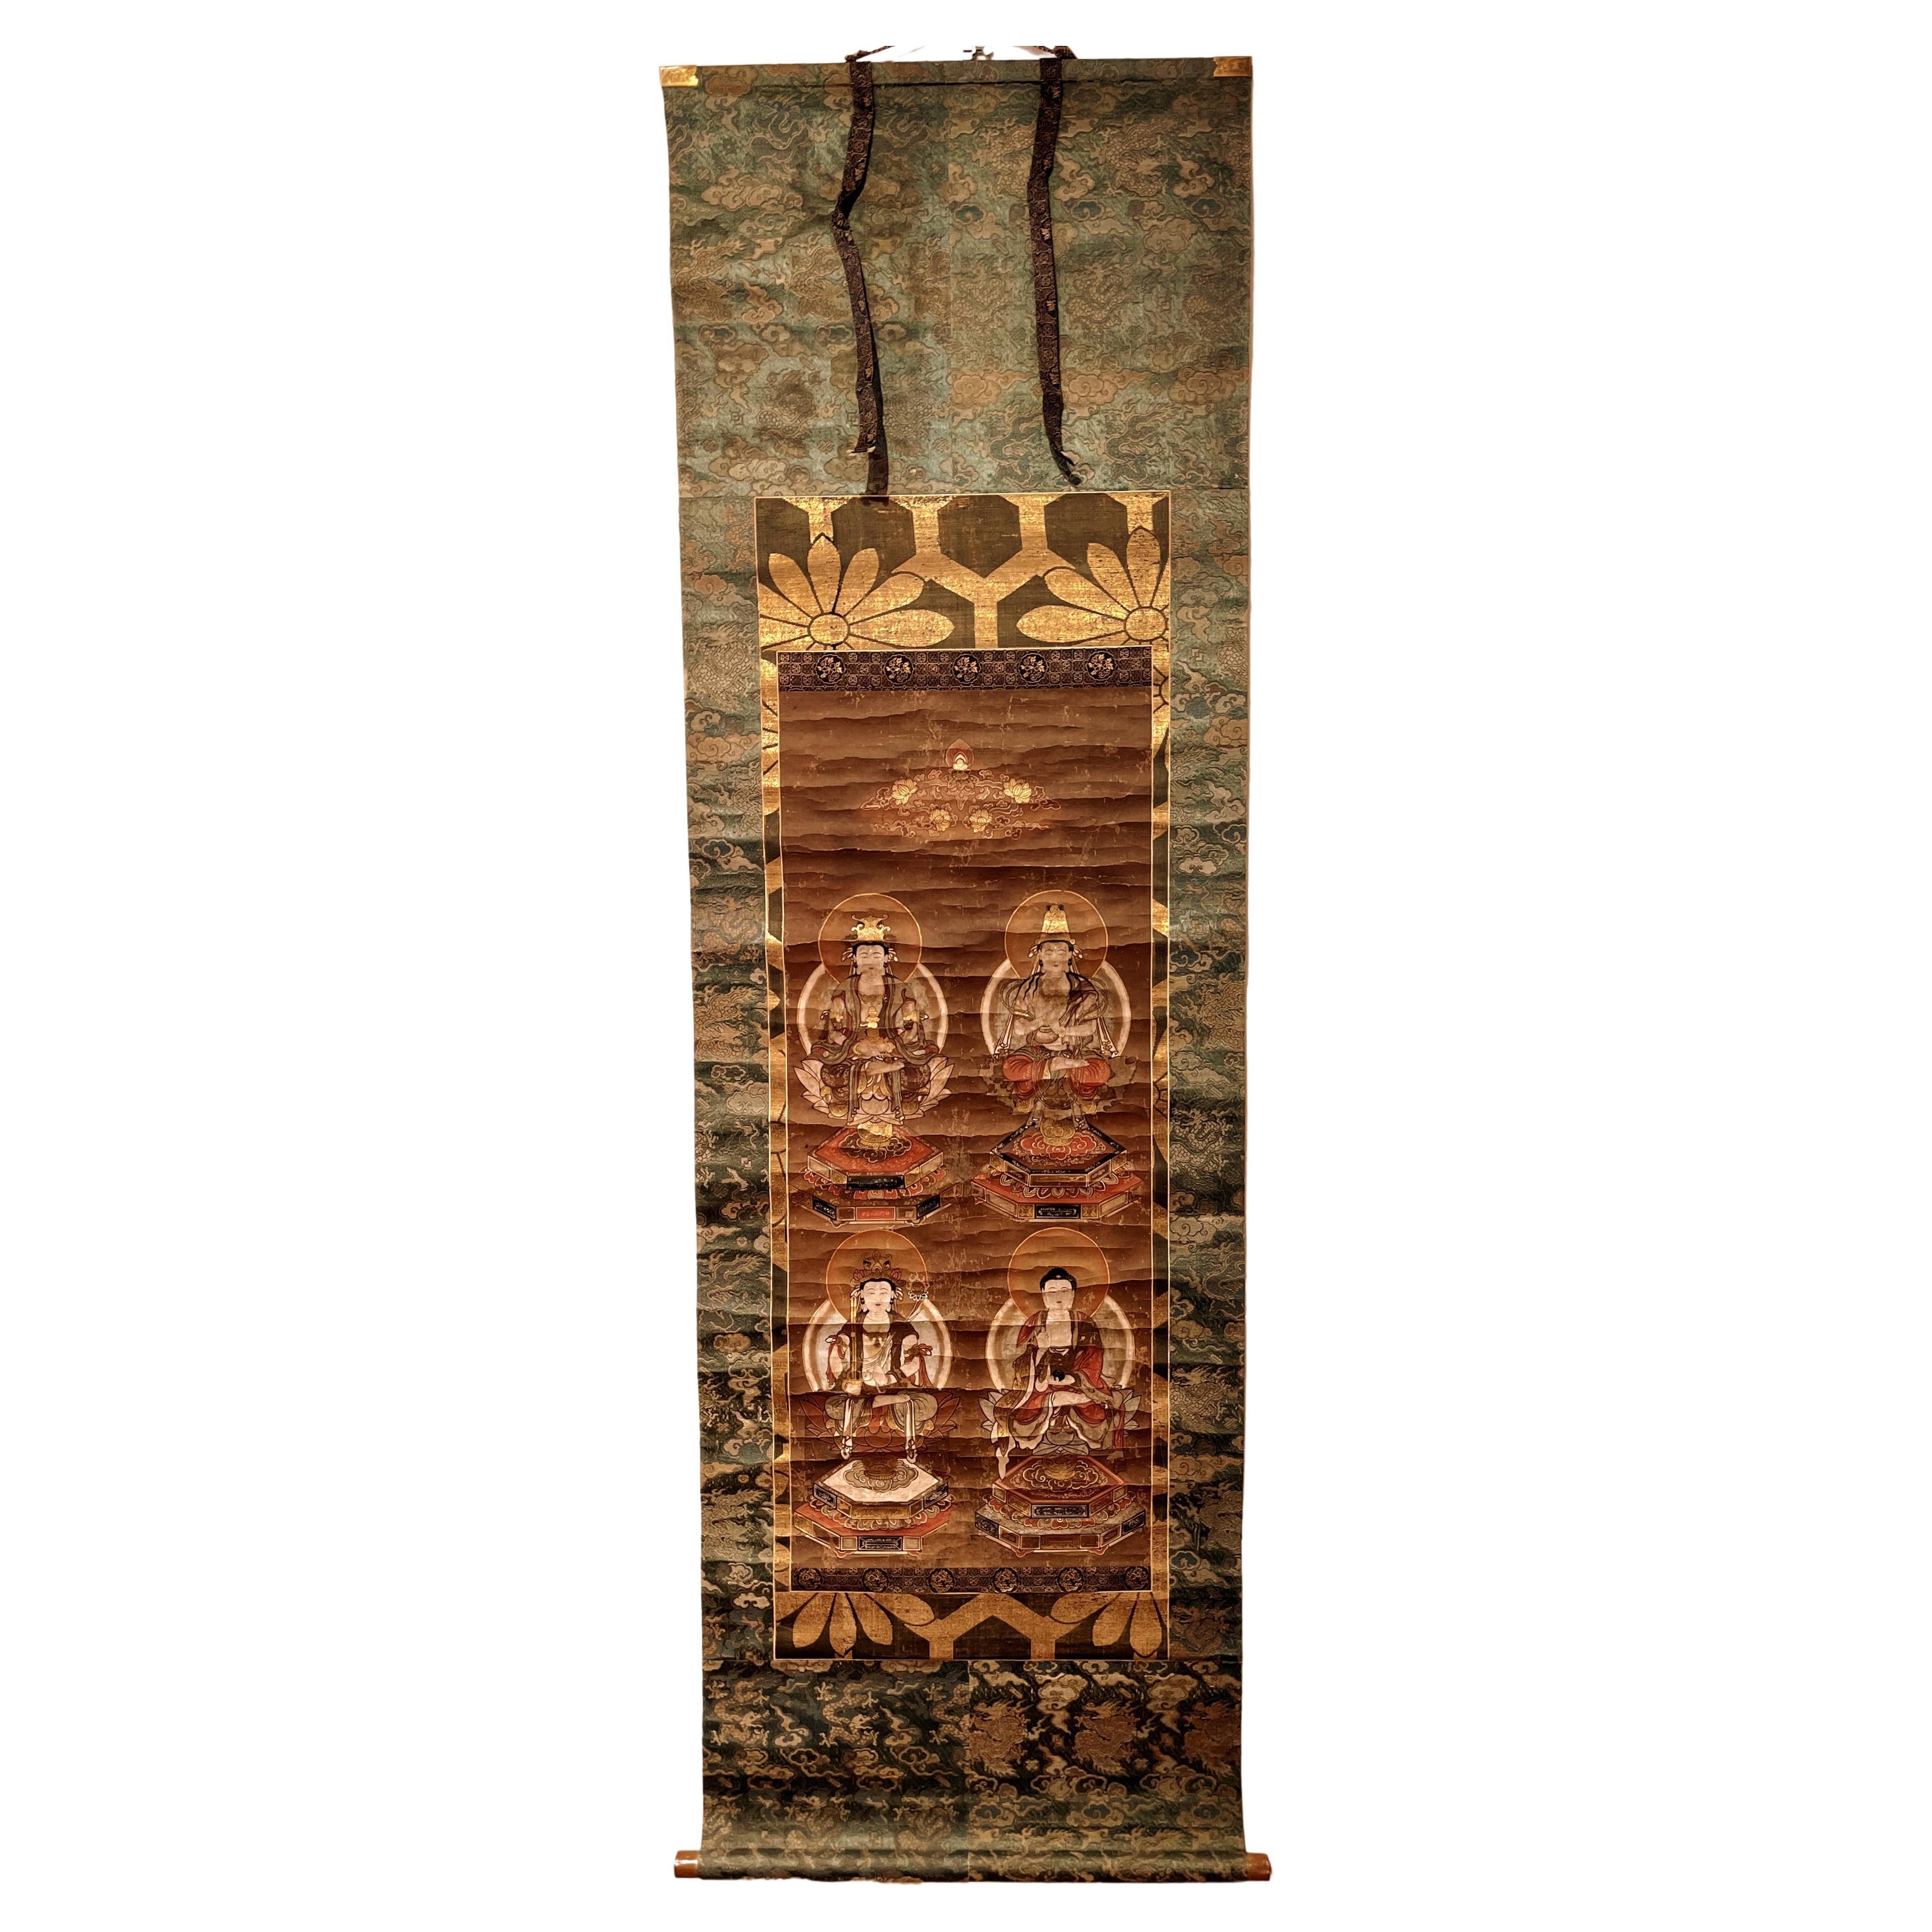 Japanese Buddhist Painting, Hanging Scroll Painting For Sale